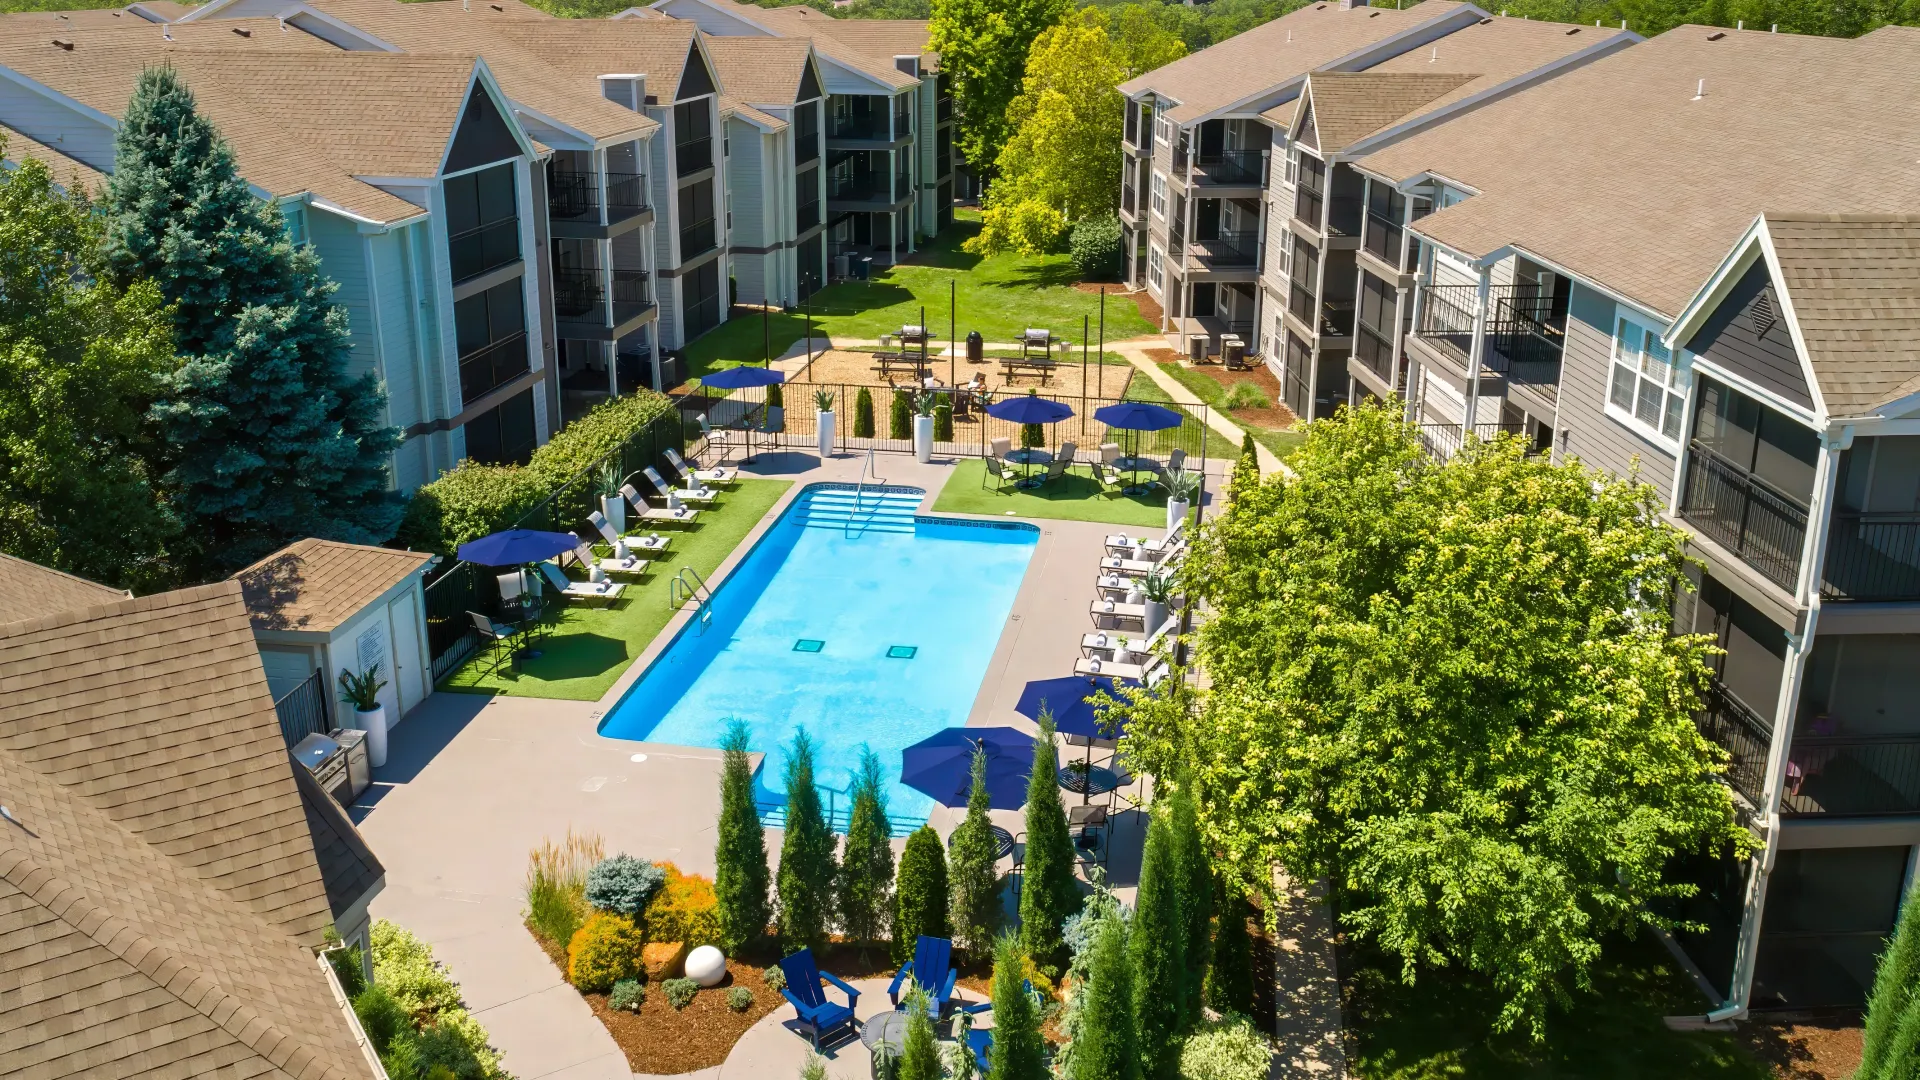 An overhead view of the vibrant pool and spacious pool deck tucked between apartment buildings. 